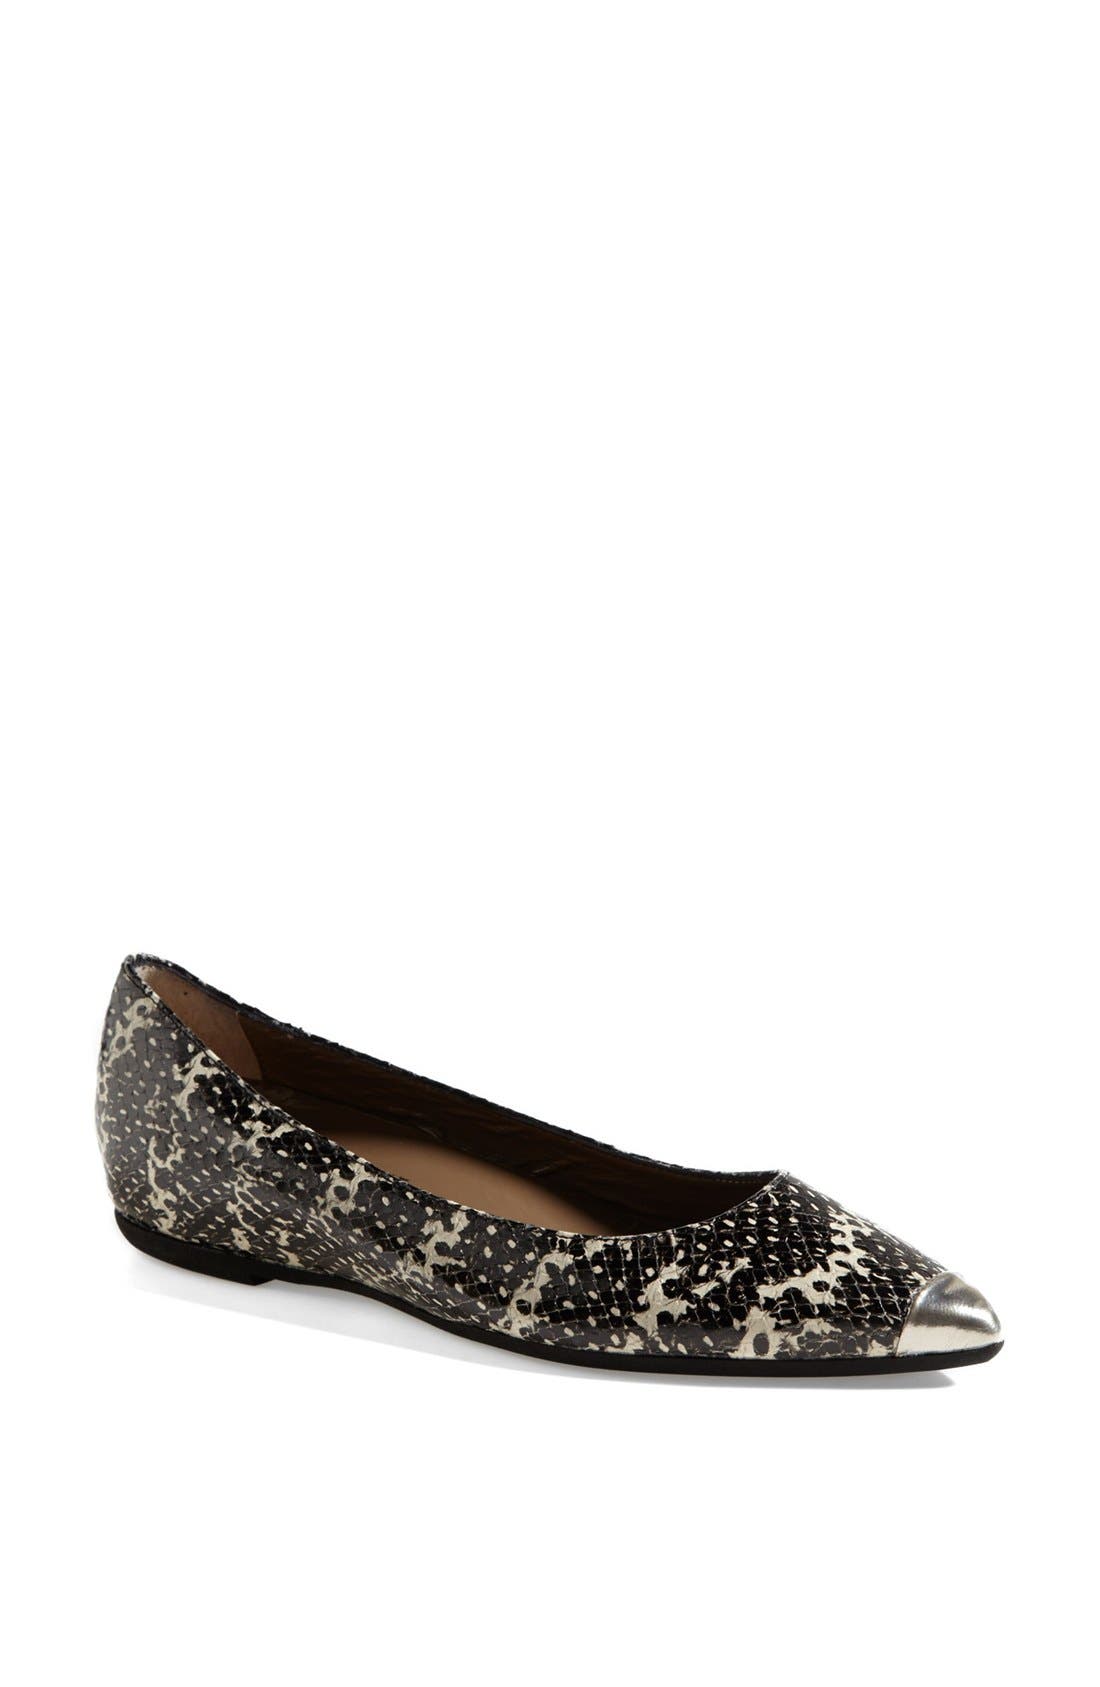 anyi lu shoes nordstrom